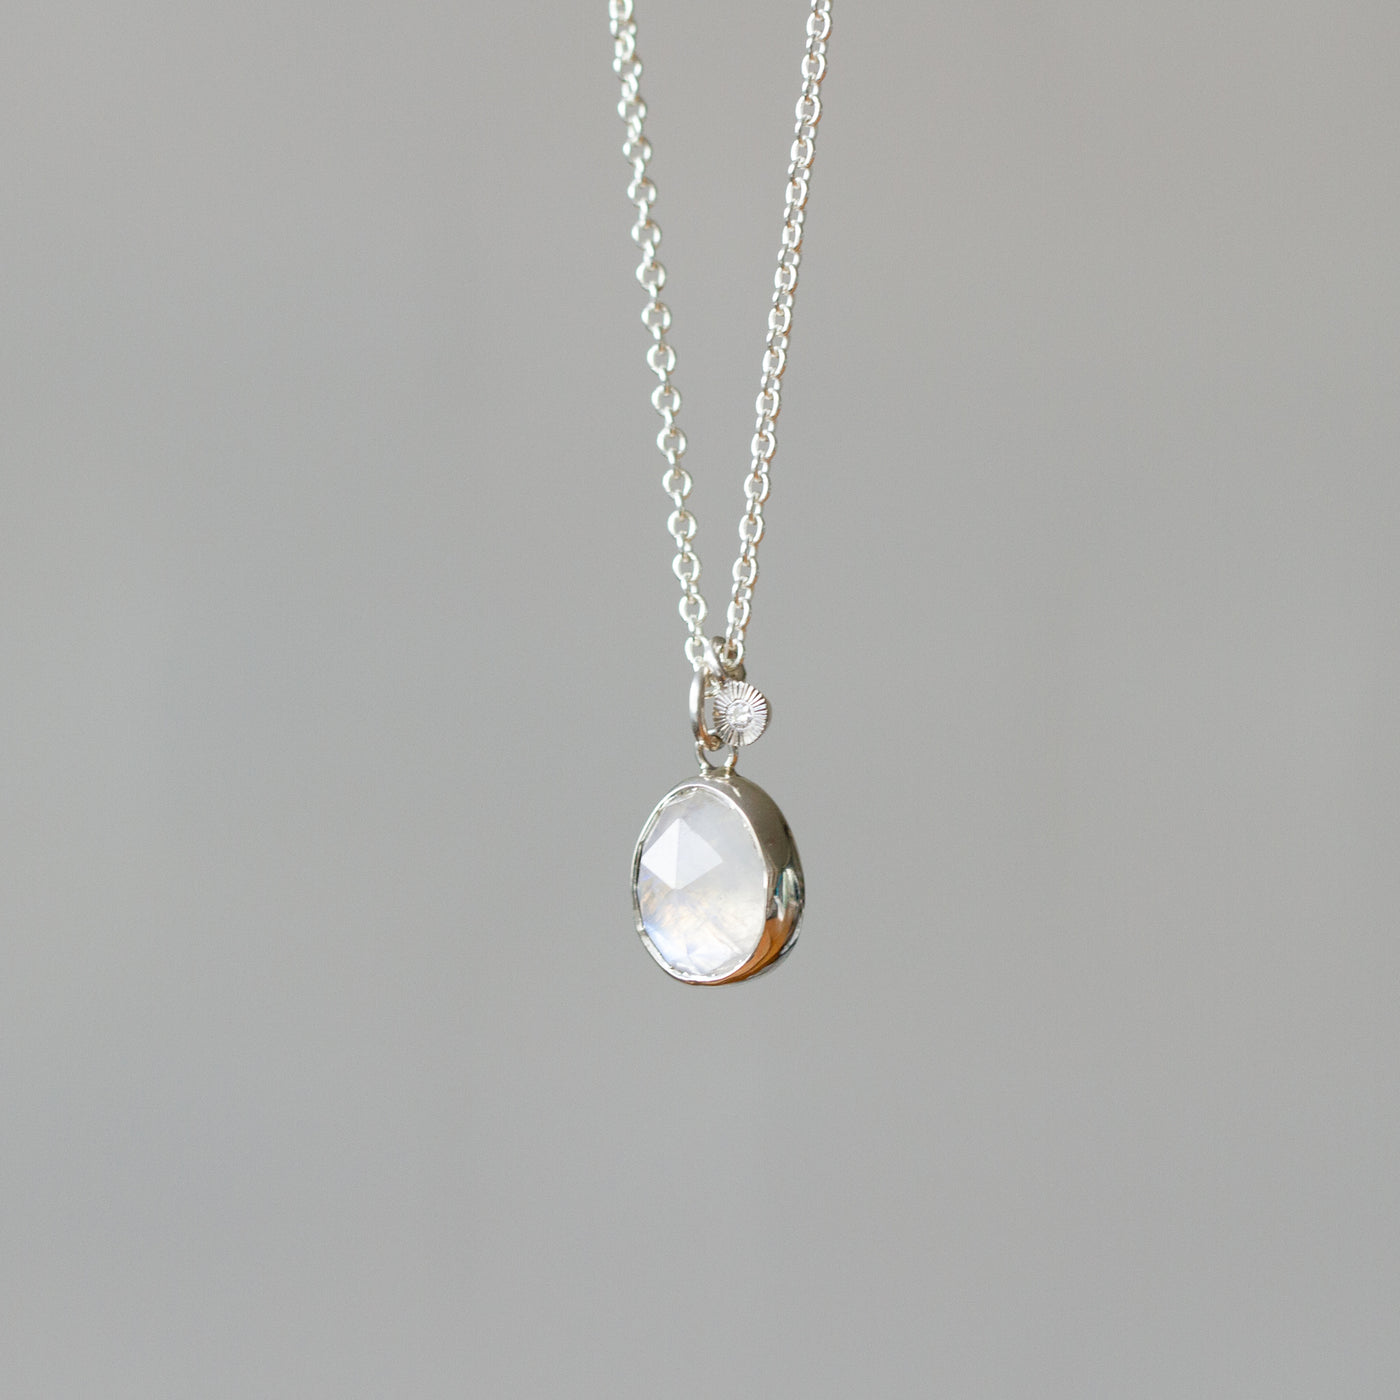 Rose Cut Moonstone Silver Theia Necklace #9 hanging in front of a white wall, side angle